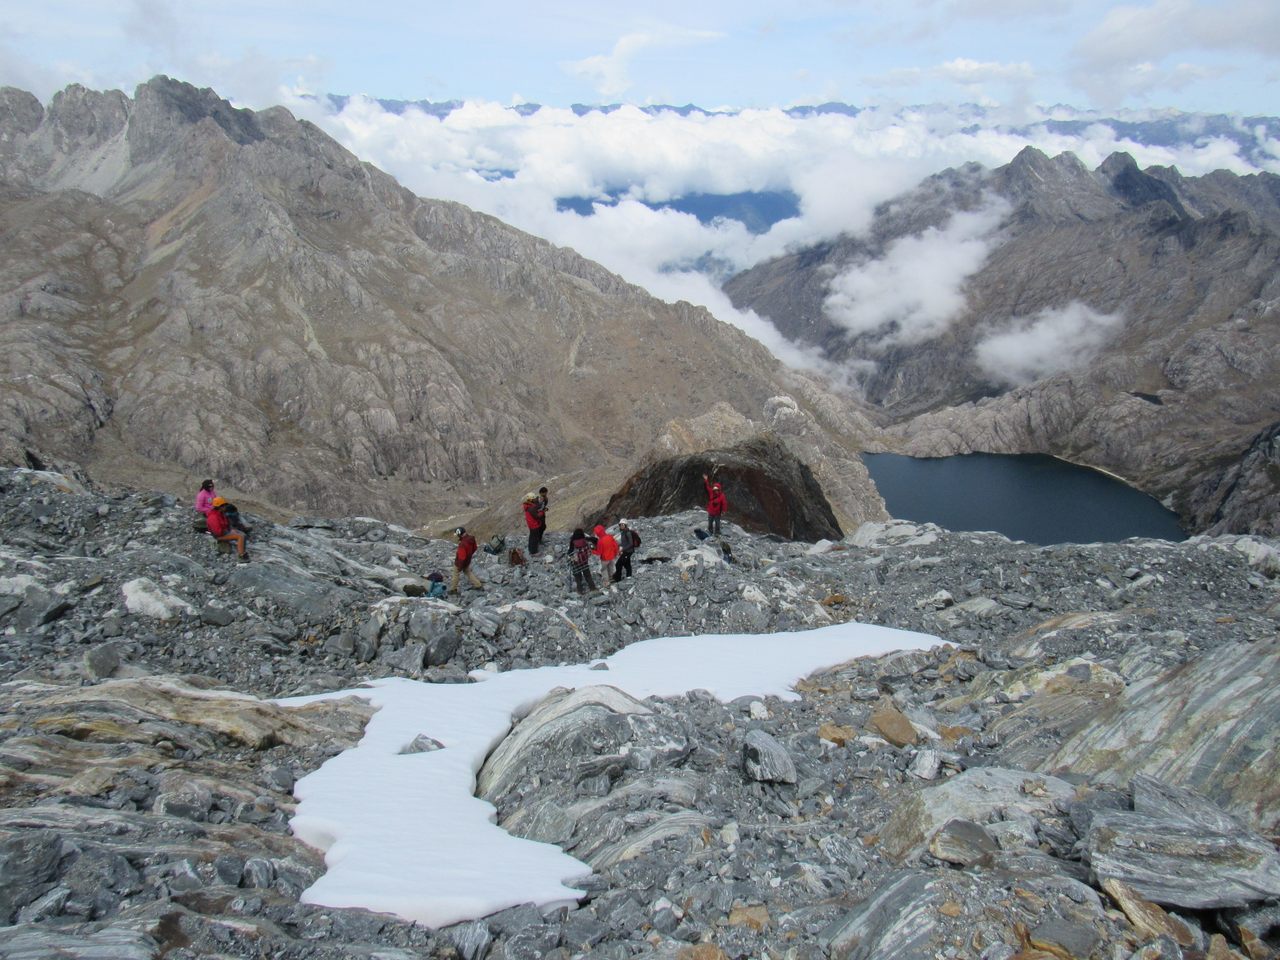 The Last Venezuelan Glacier team examines the recently exposed areas just below the Humboldt's glacier edge in 2019, more than 15,000 feet of elevation. 